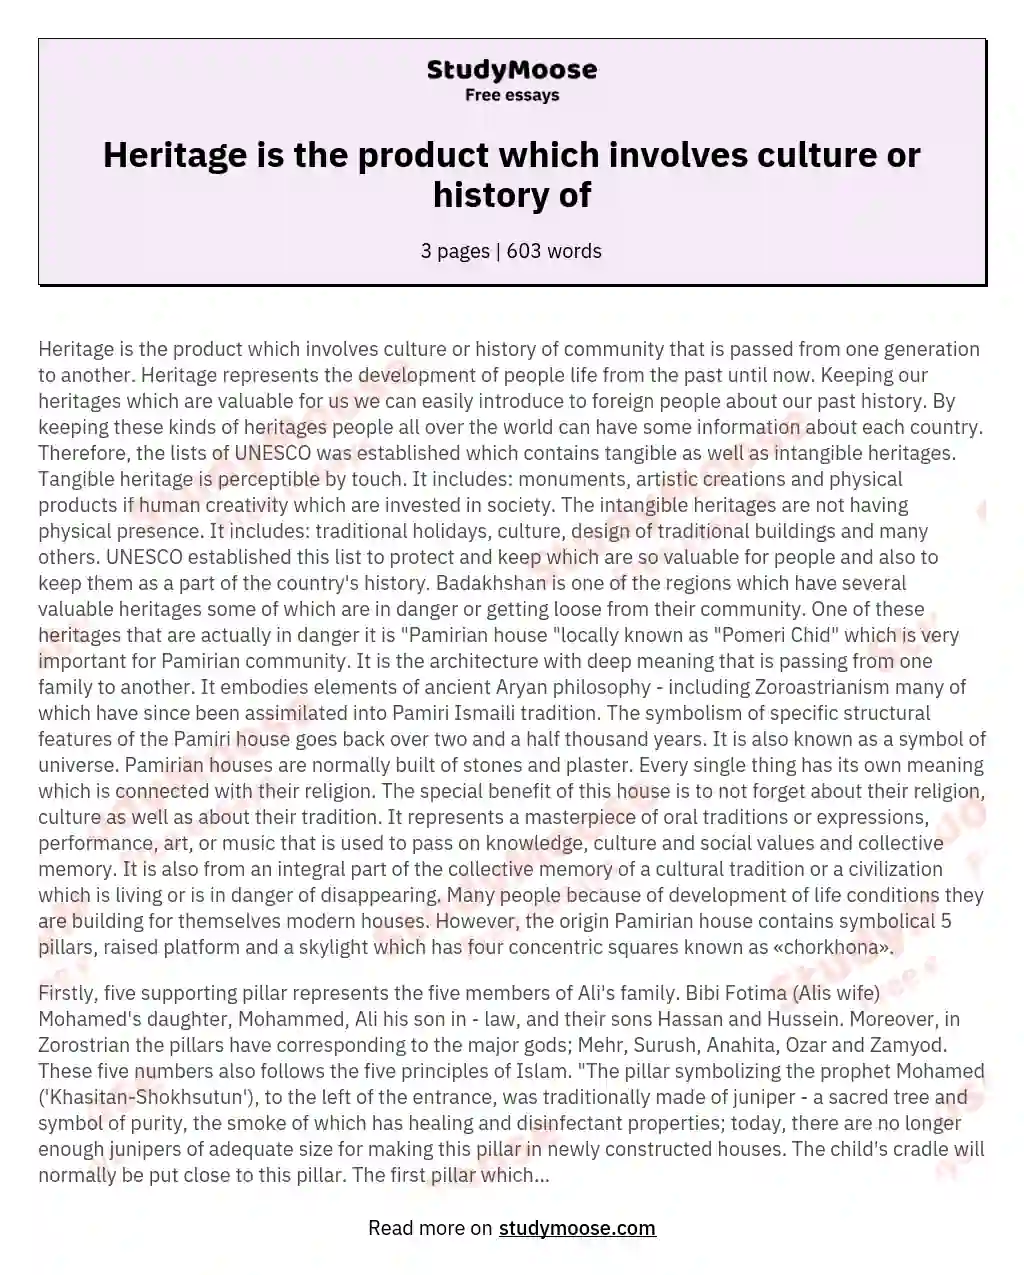 Heritage is the product which involves culture or history of